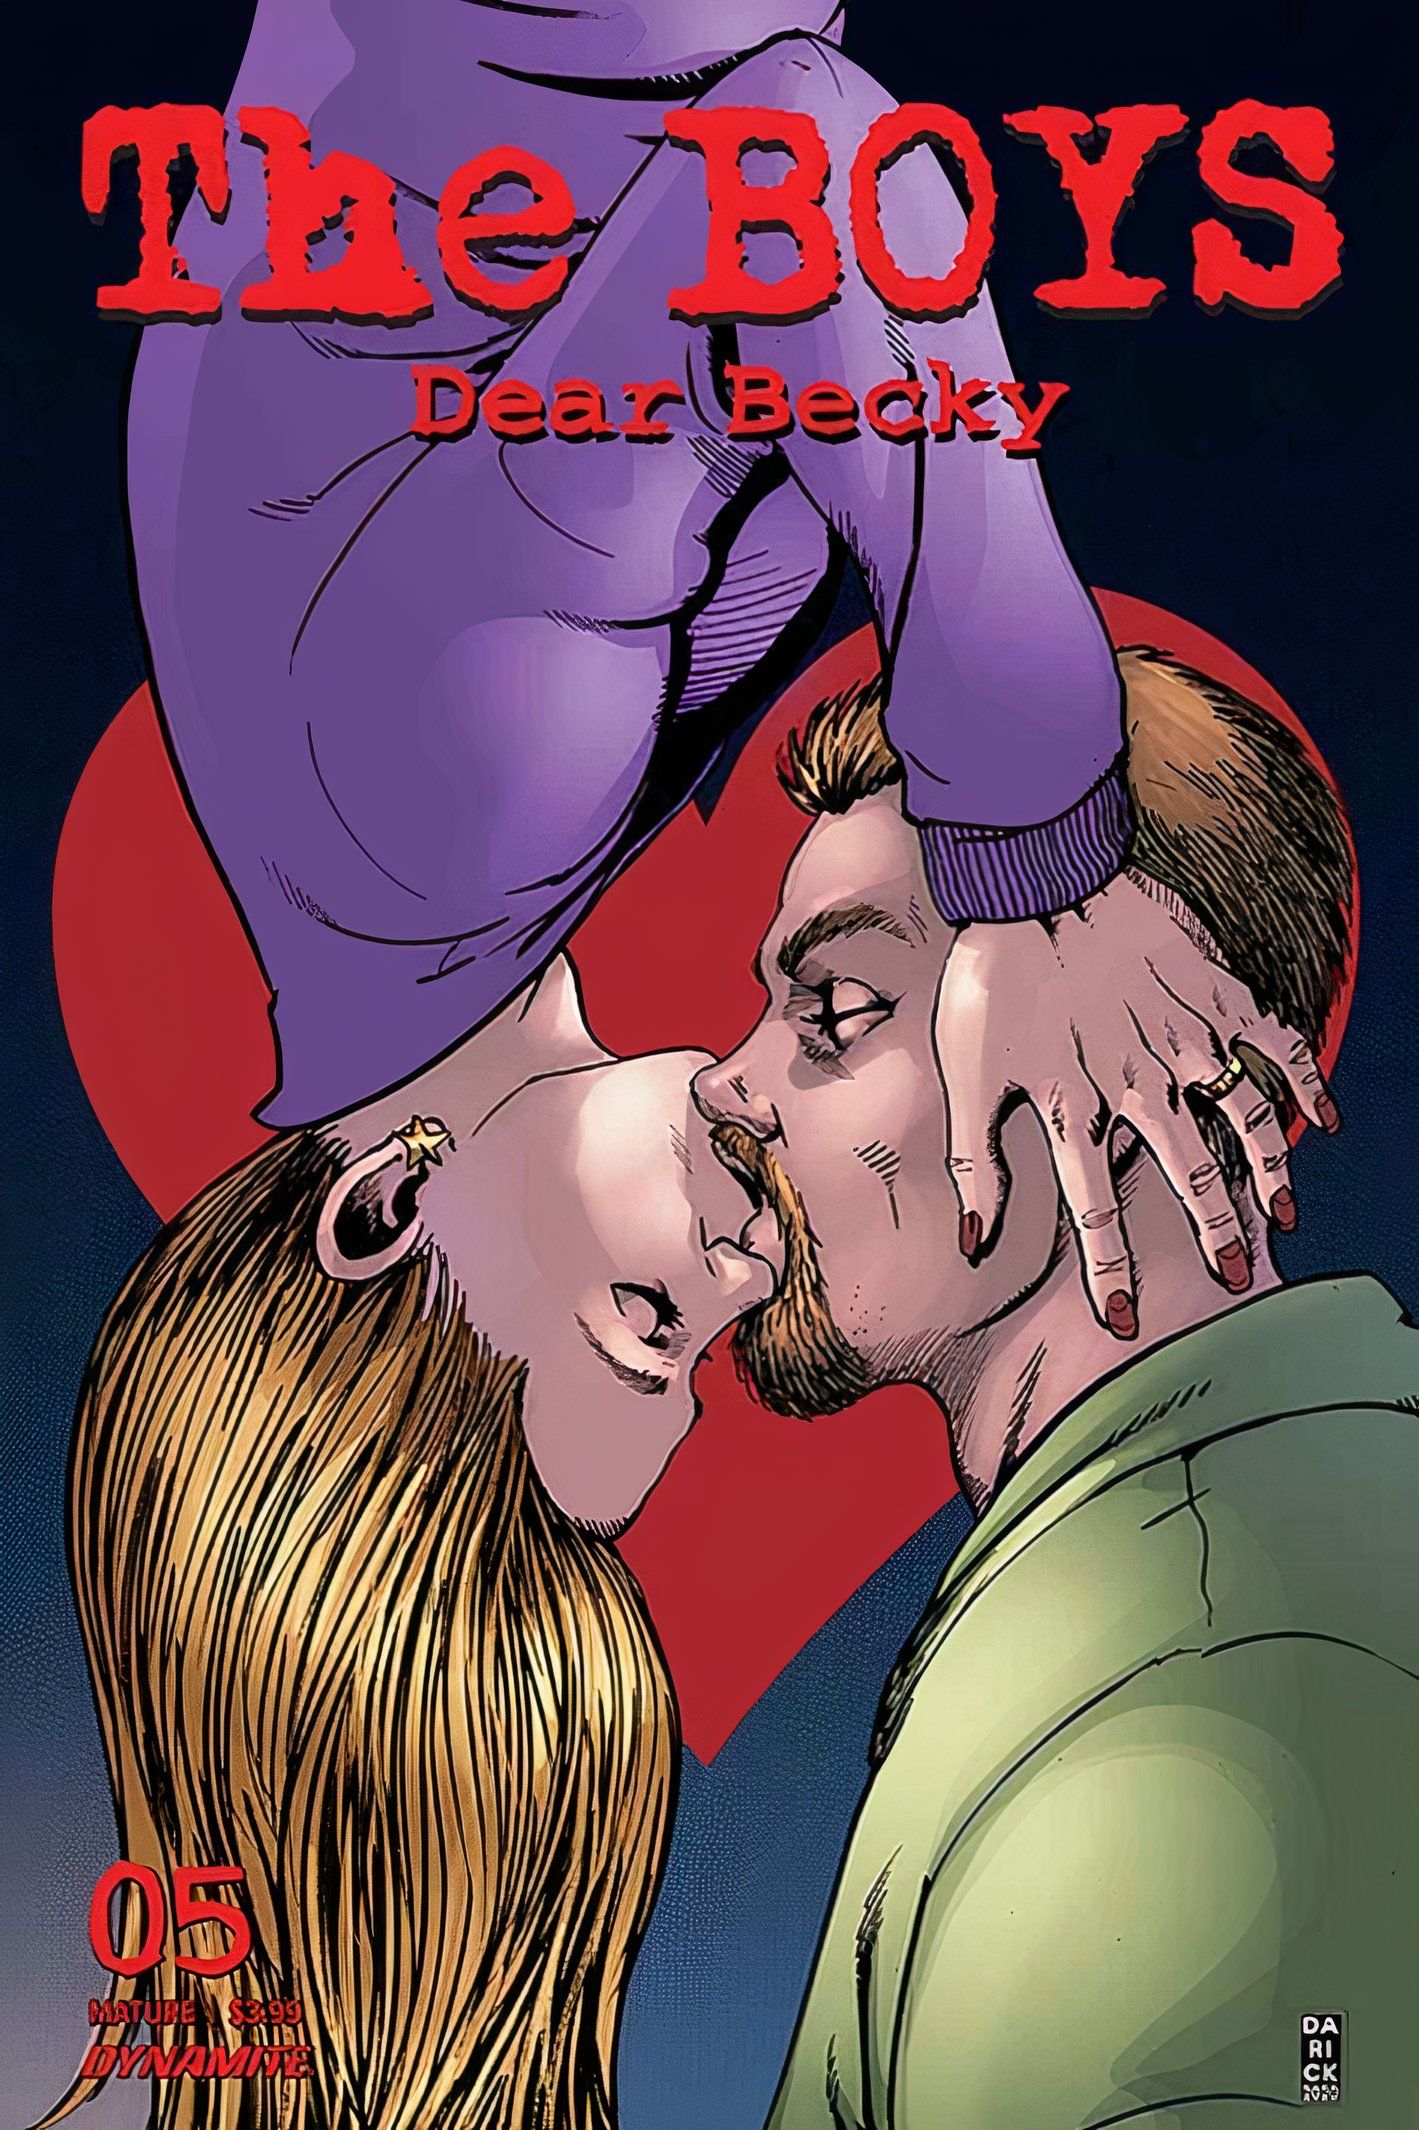 The Boys: Dear Becky #5, Spider-Man homage cover, Annie hanging upside down kissing Hughie.